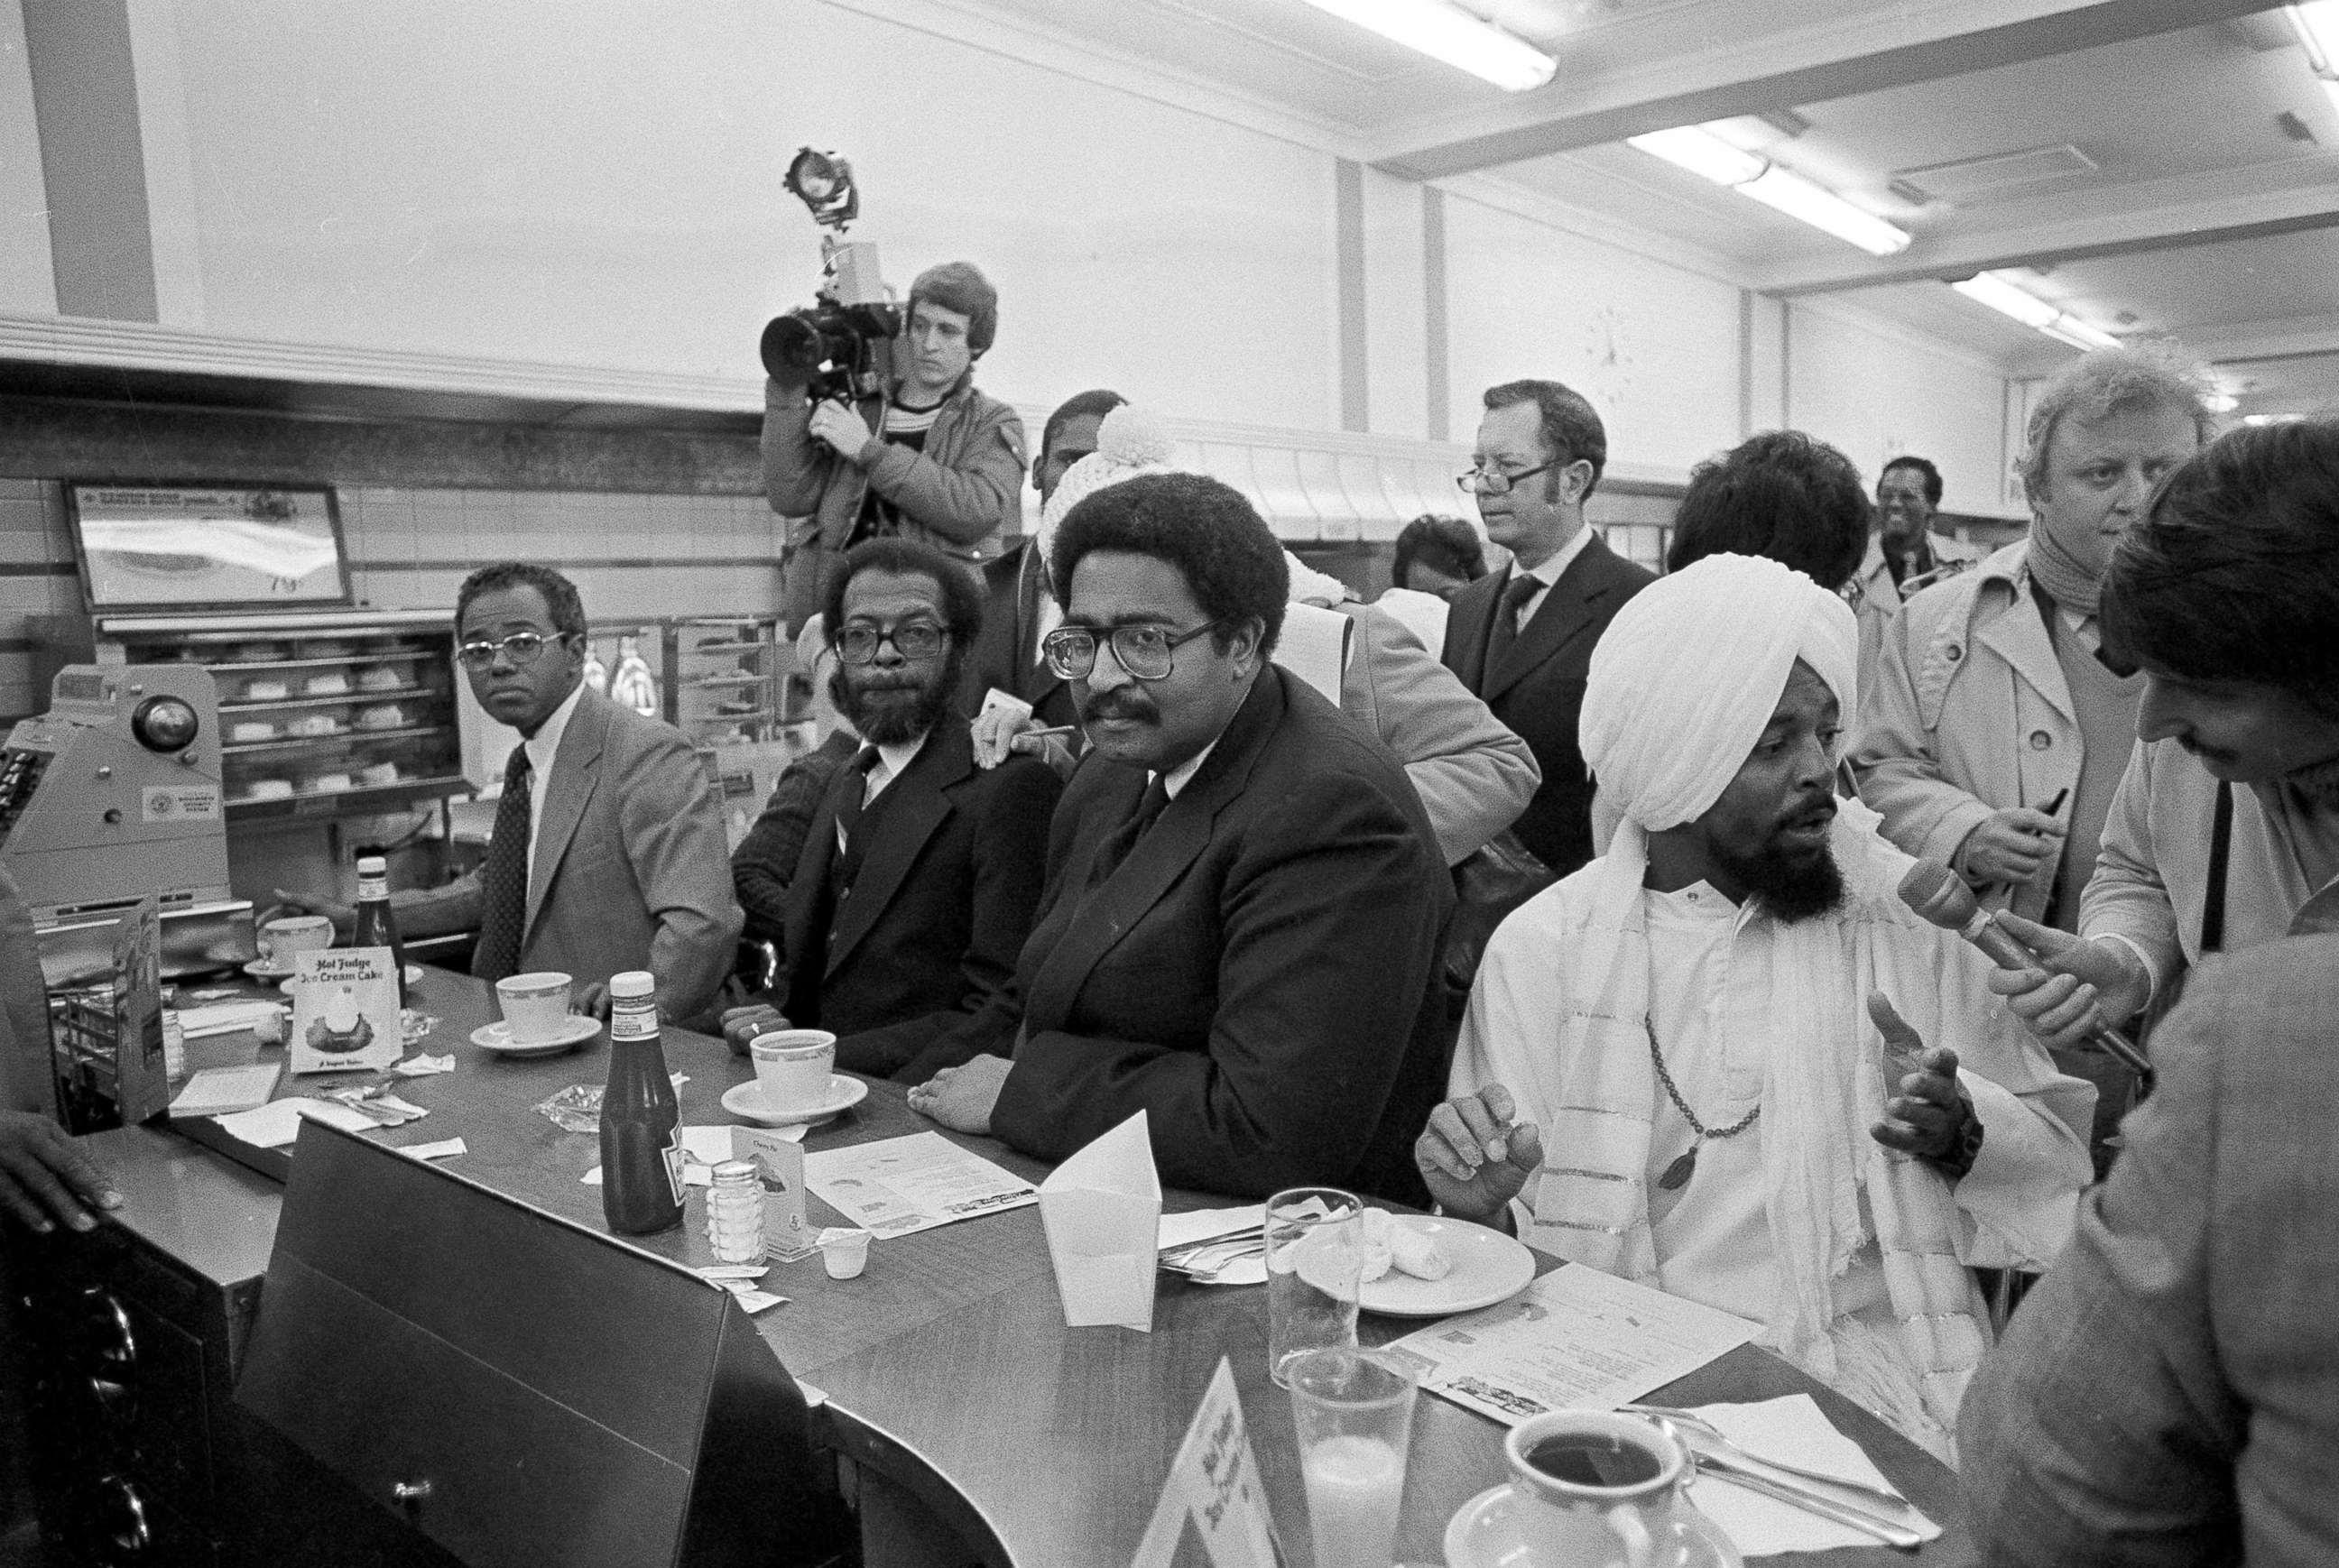 PHOTO: From left, Joseph McNeill, David Richmond, Franklin McCain and Jibreel Khazan, sit at the F.W. Woolworth lunch counter in Greensboro, N.C., Feb. 1, 1980, during events to mark the 20th anniversary of their historic sit-in.